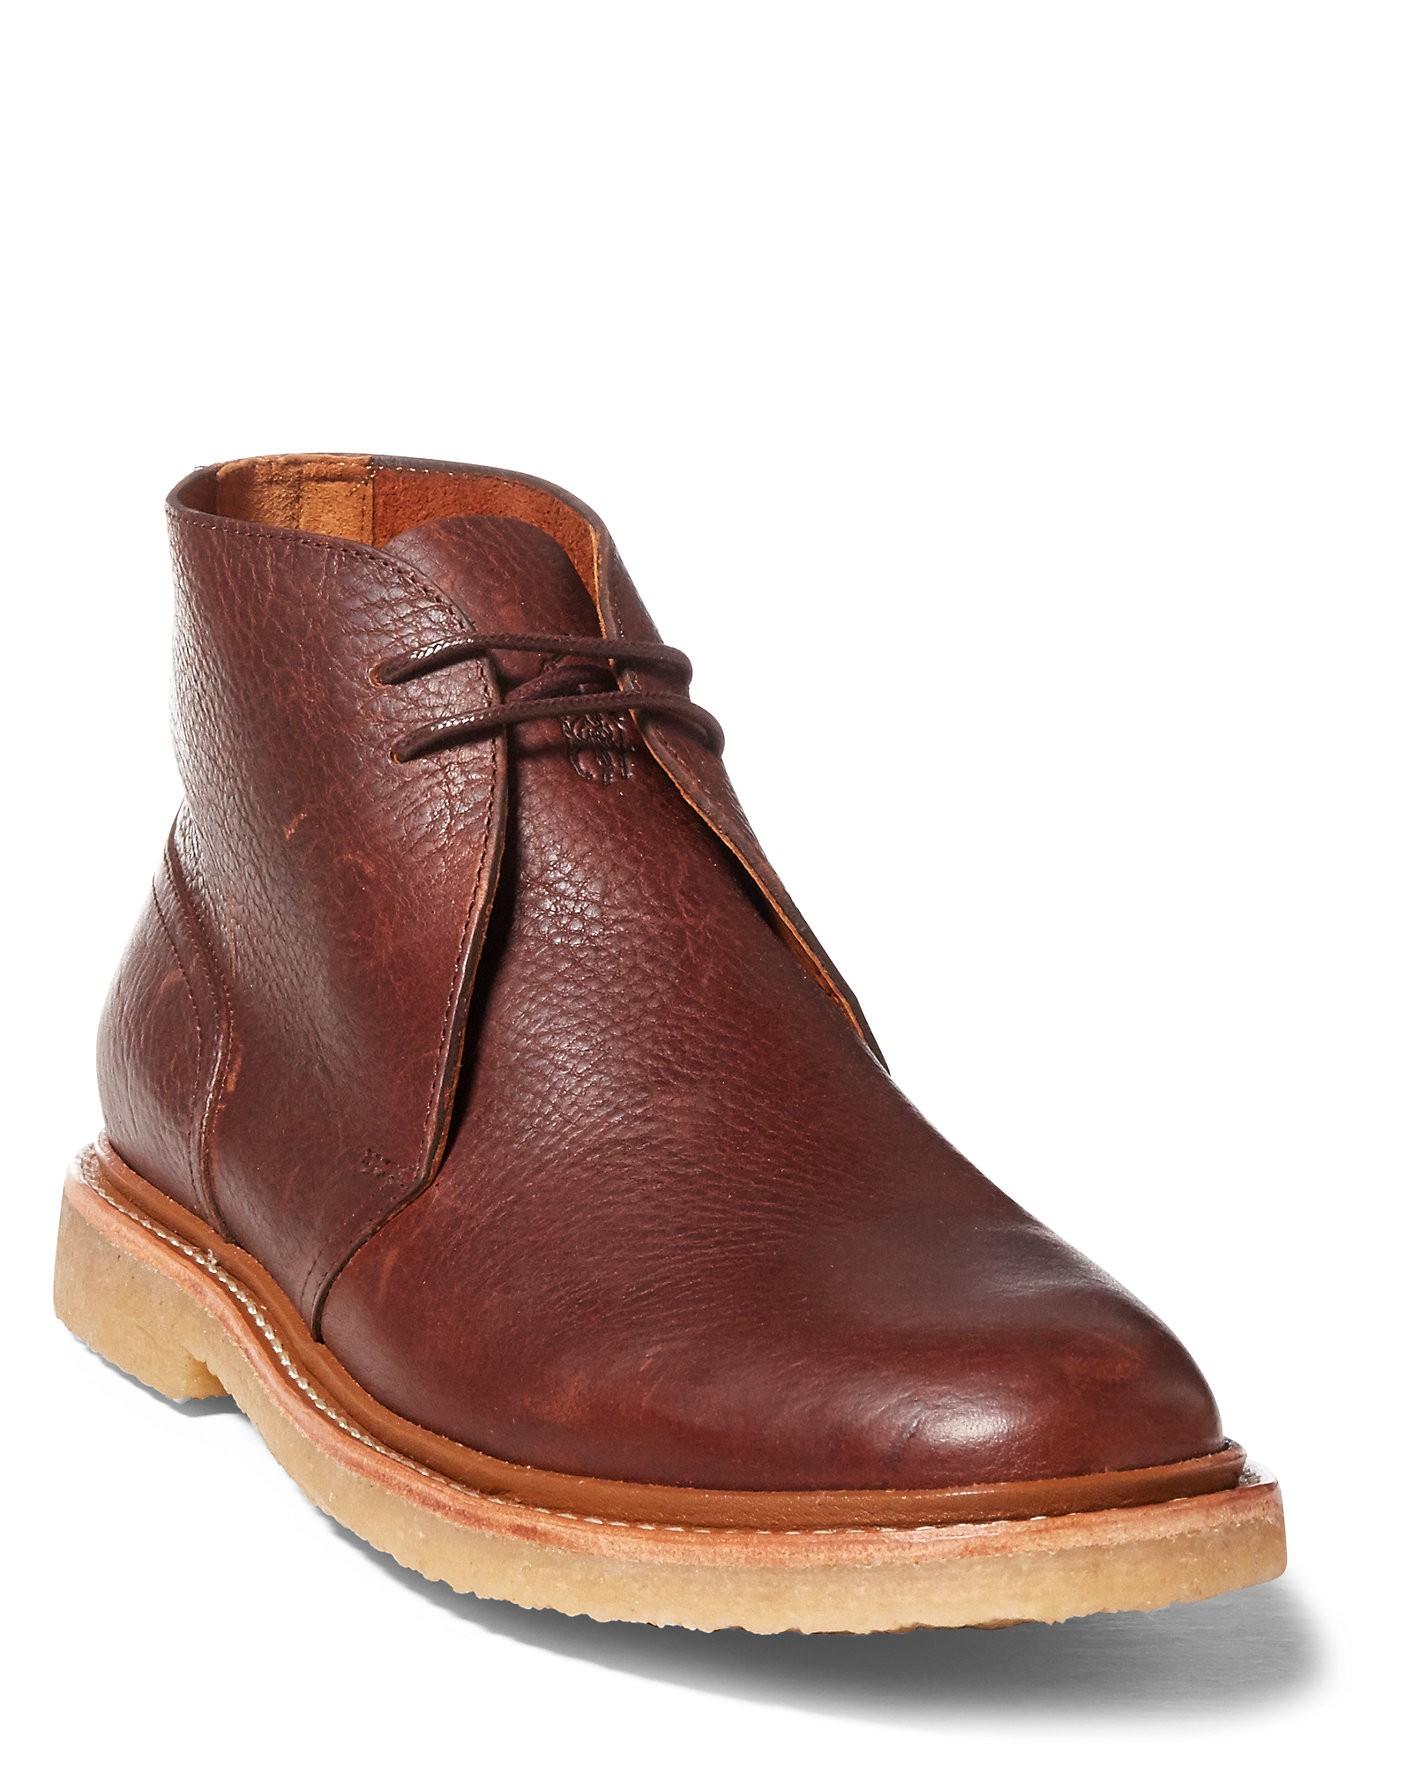 karlyle leather chukka boot